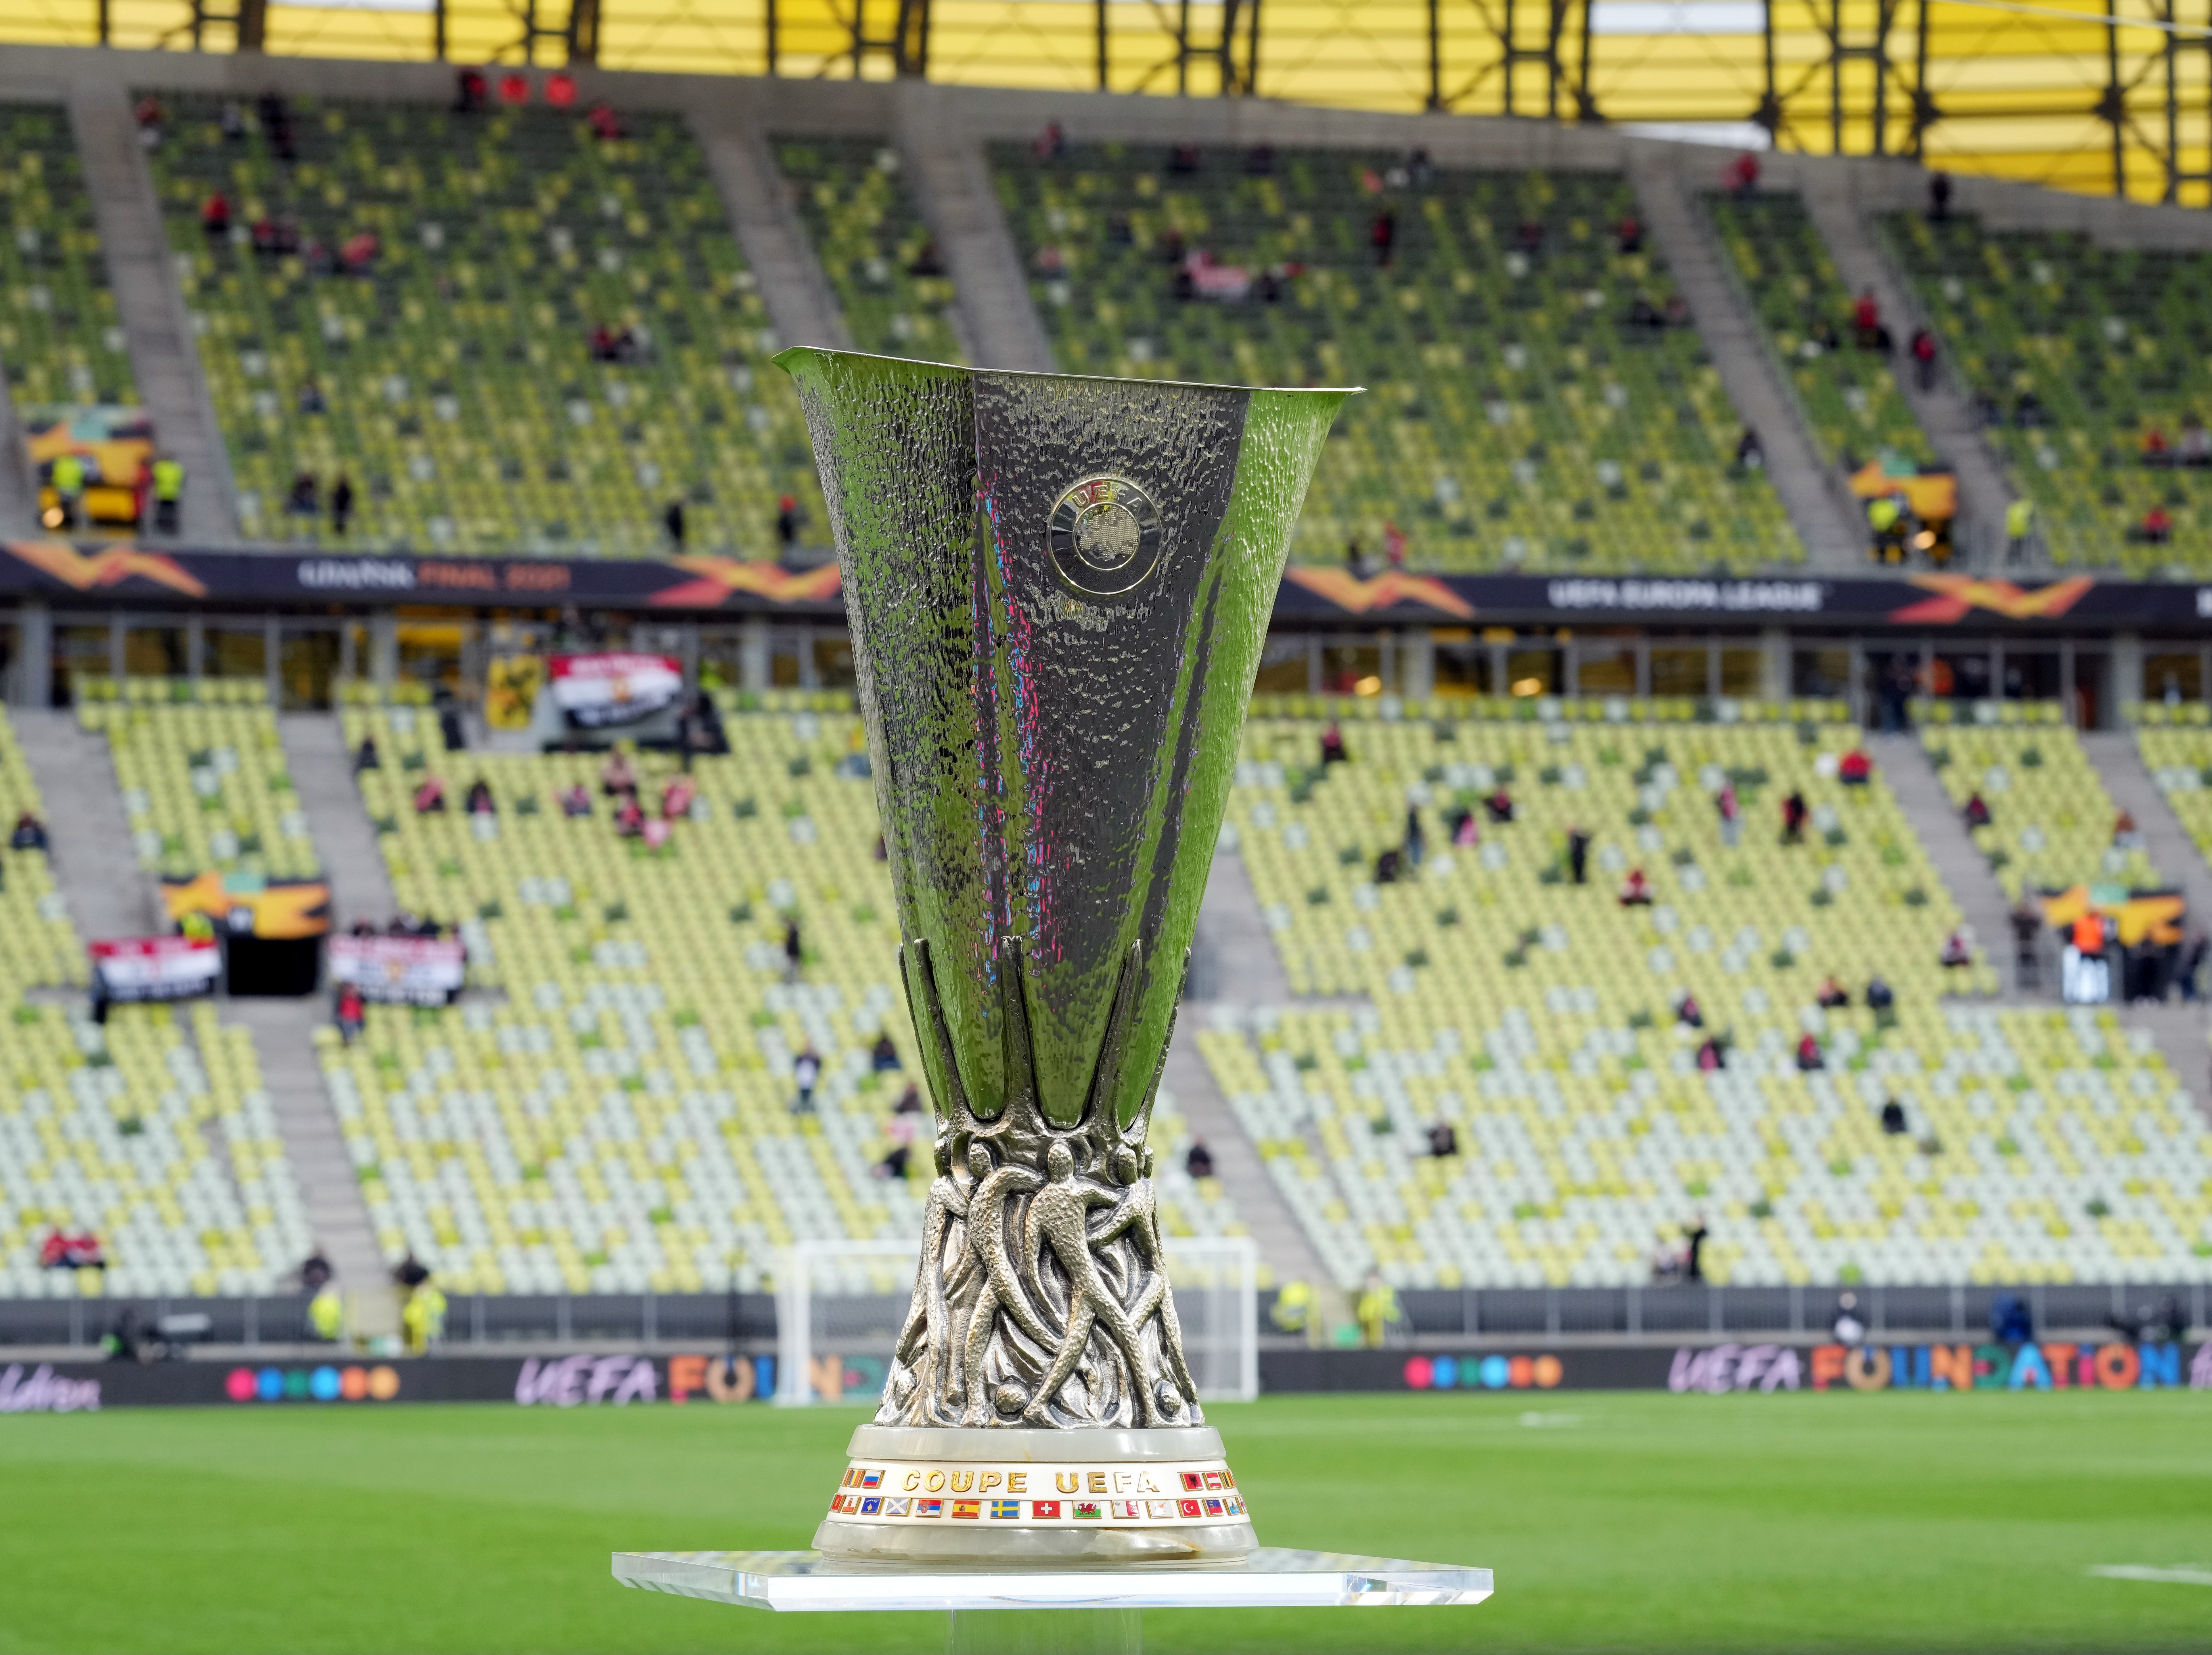 The Europa League trophy before its presentation at the end of the 2020/21 campaign